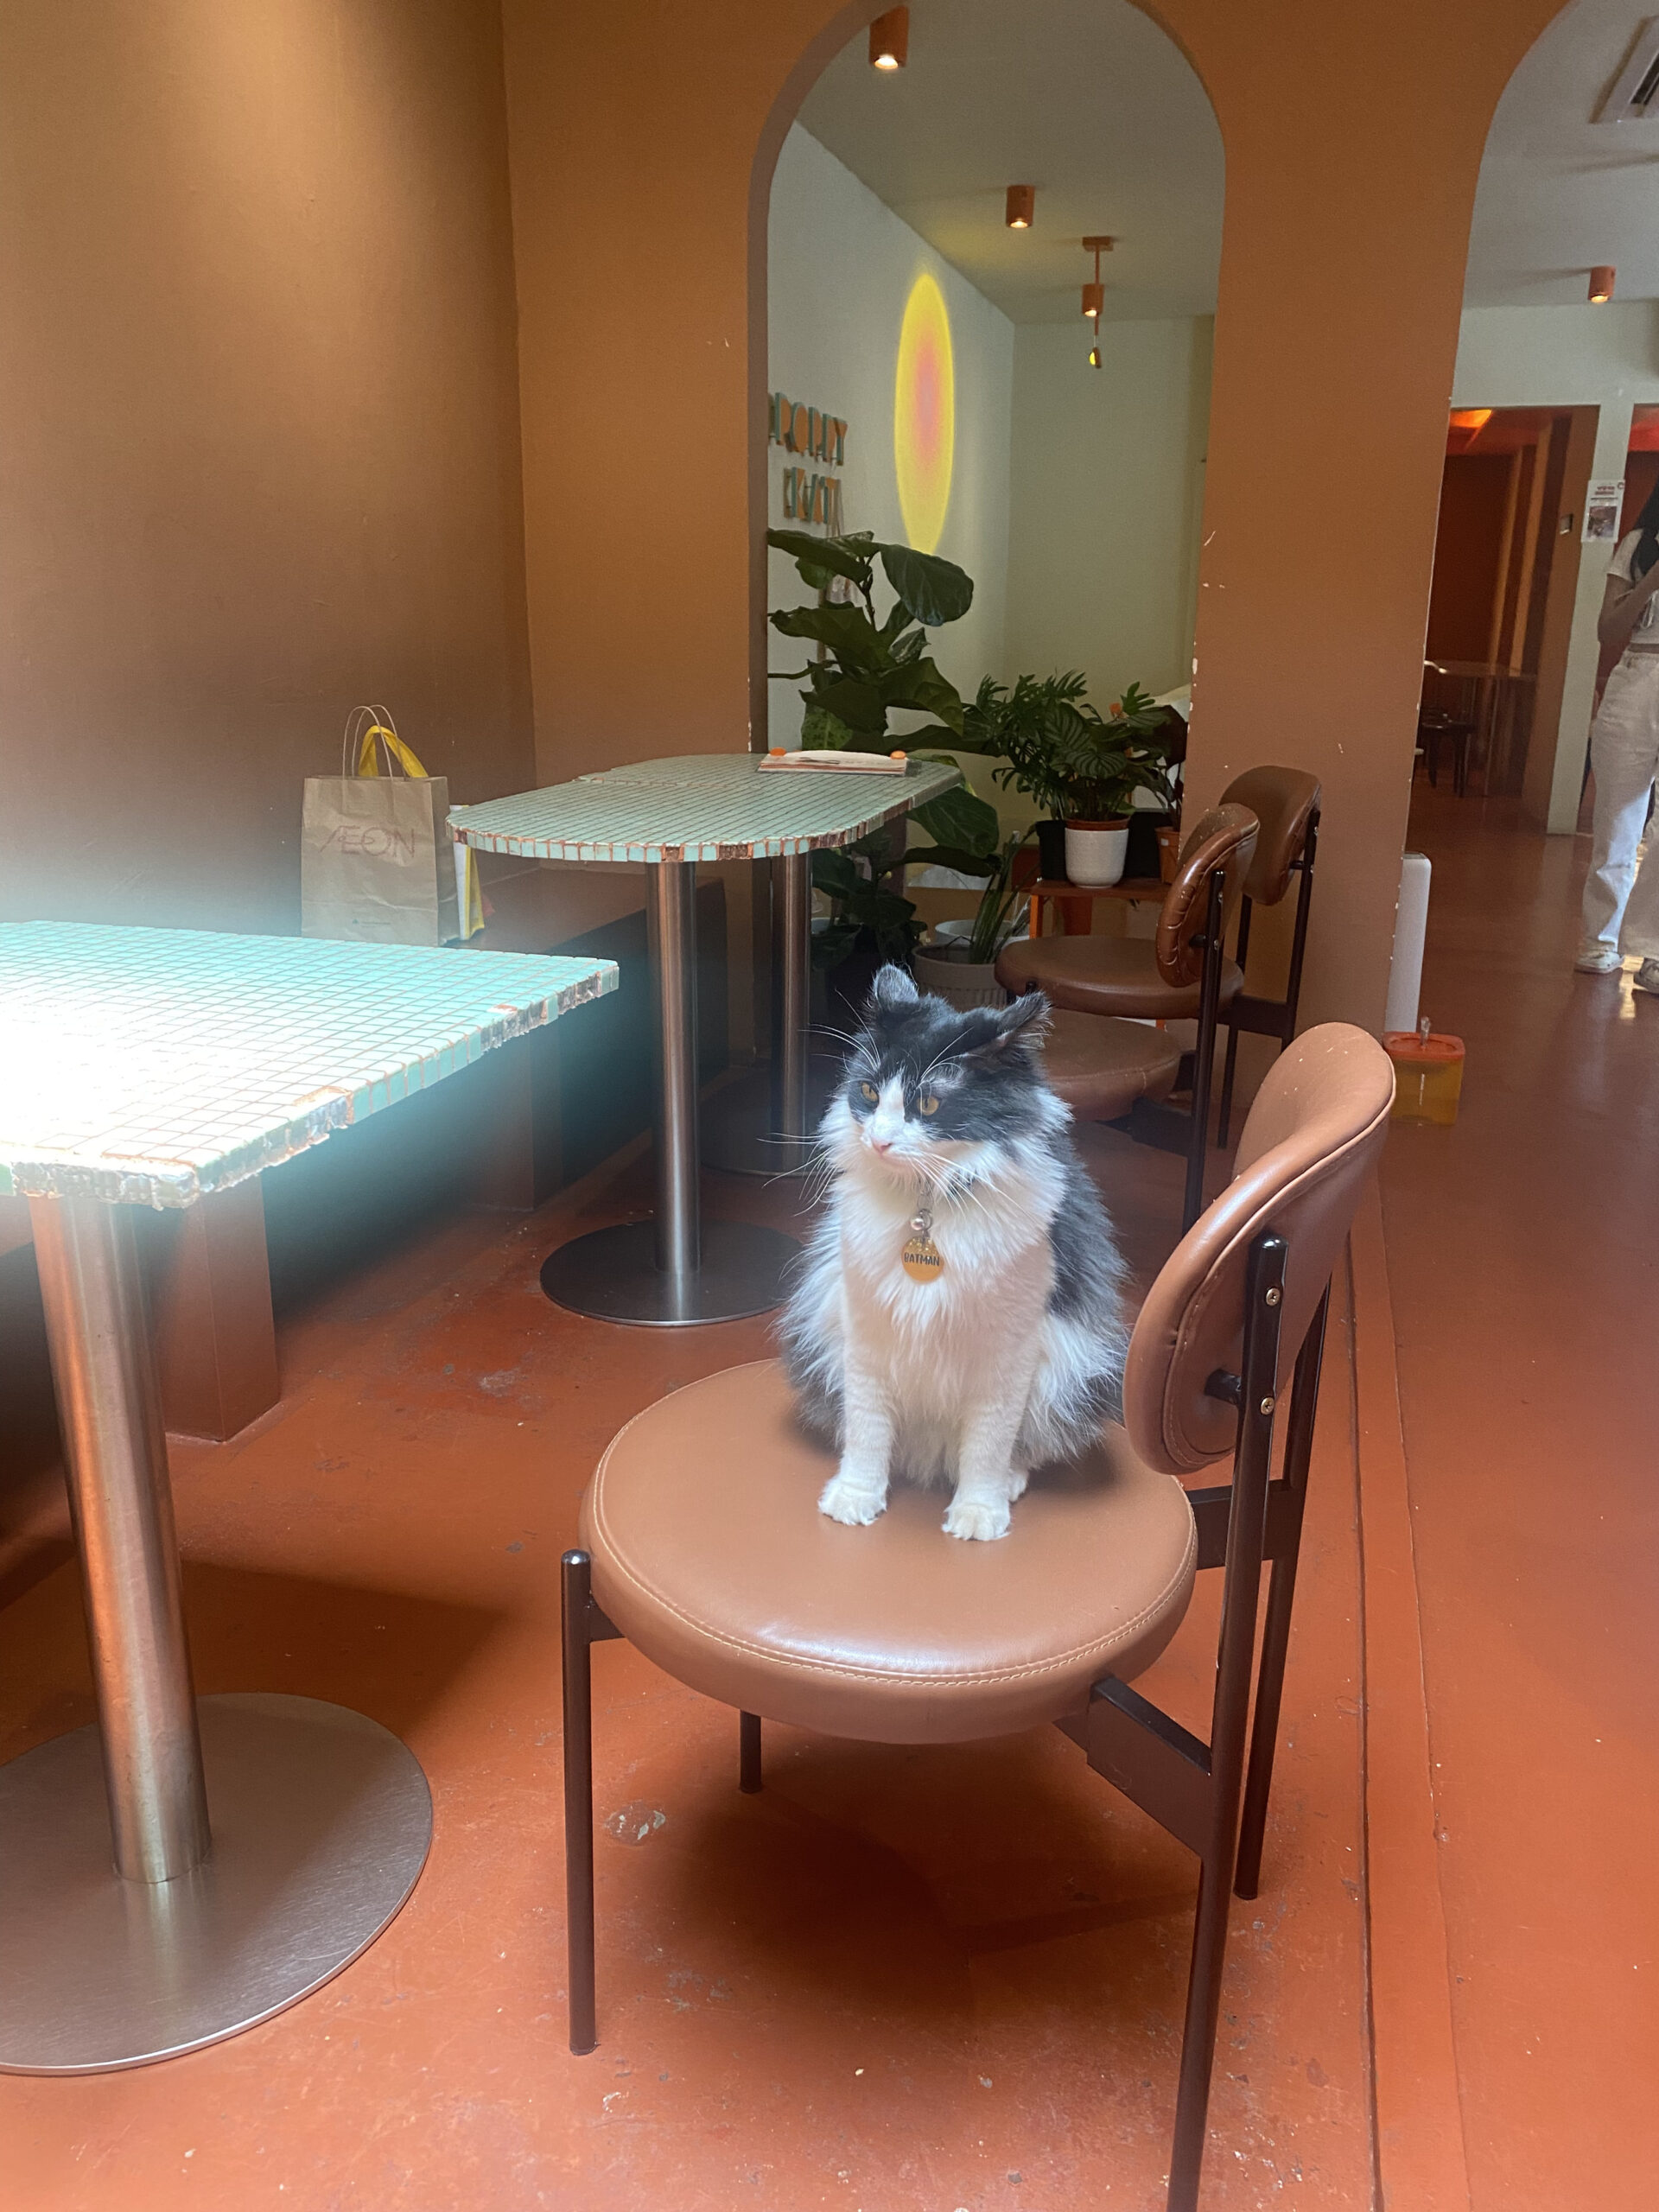 I went to the instagrammable cat cafe in cheras with no entrance fee & croffles at rm15 only. Here's my review